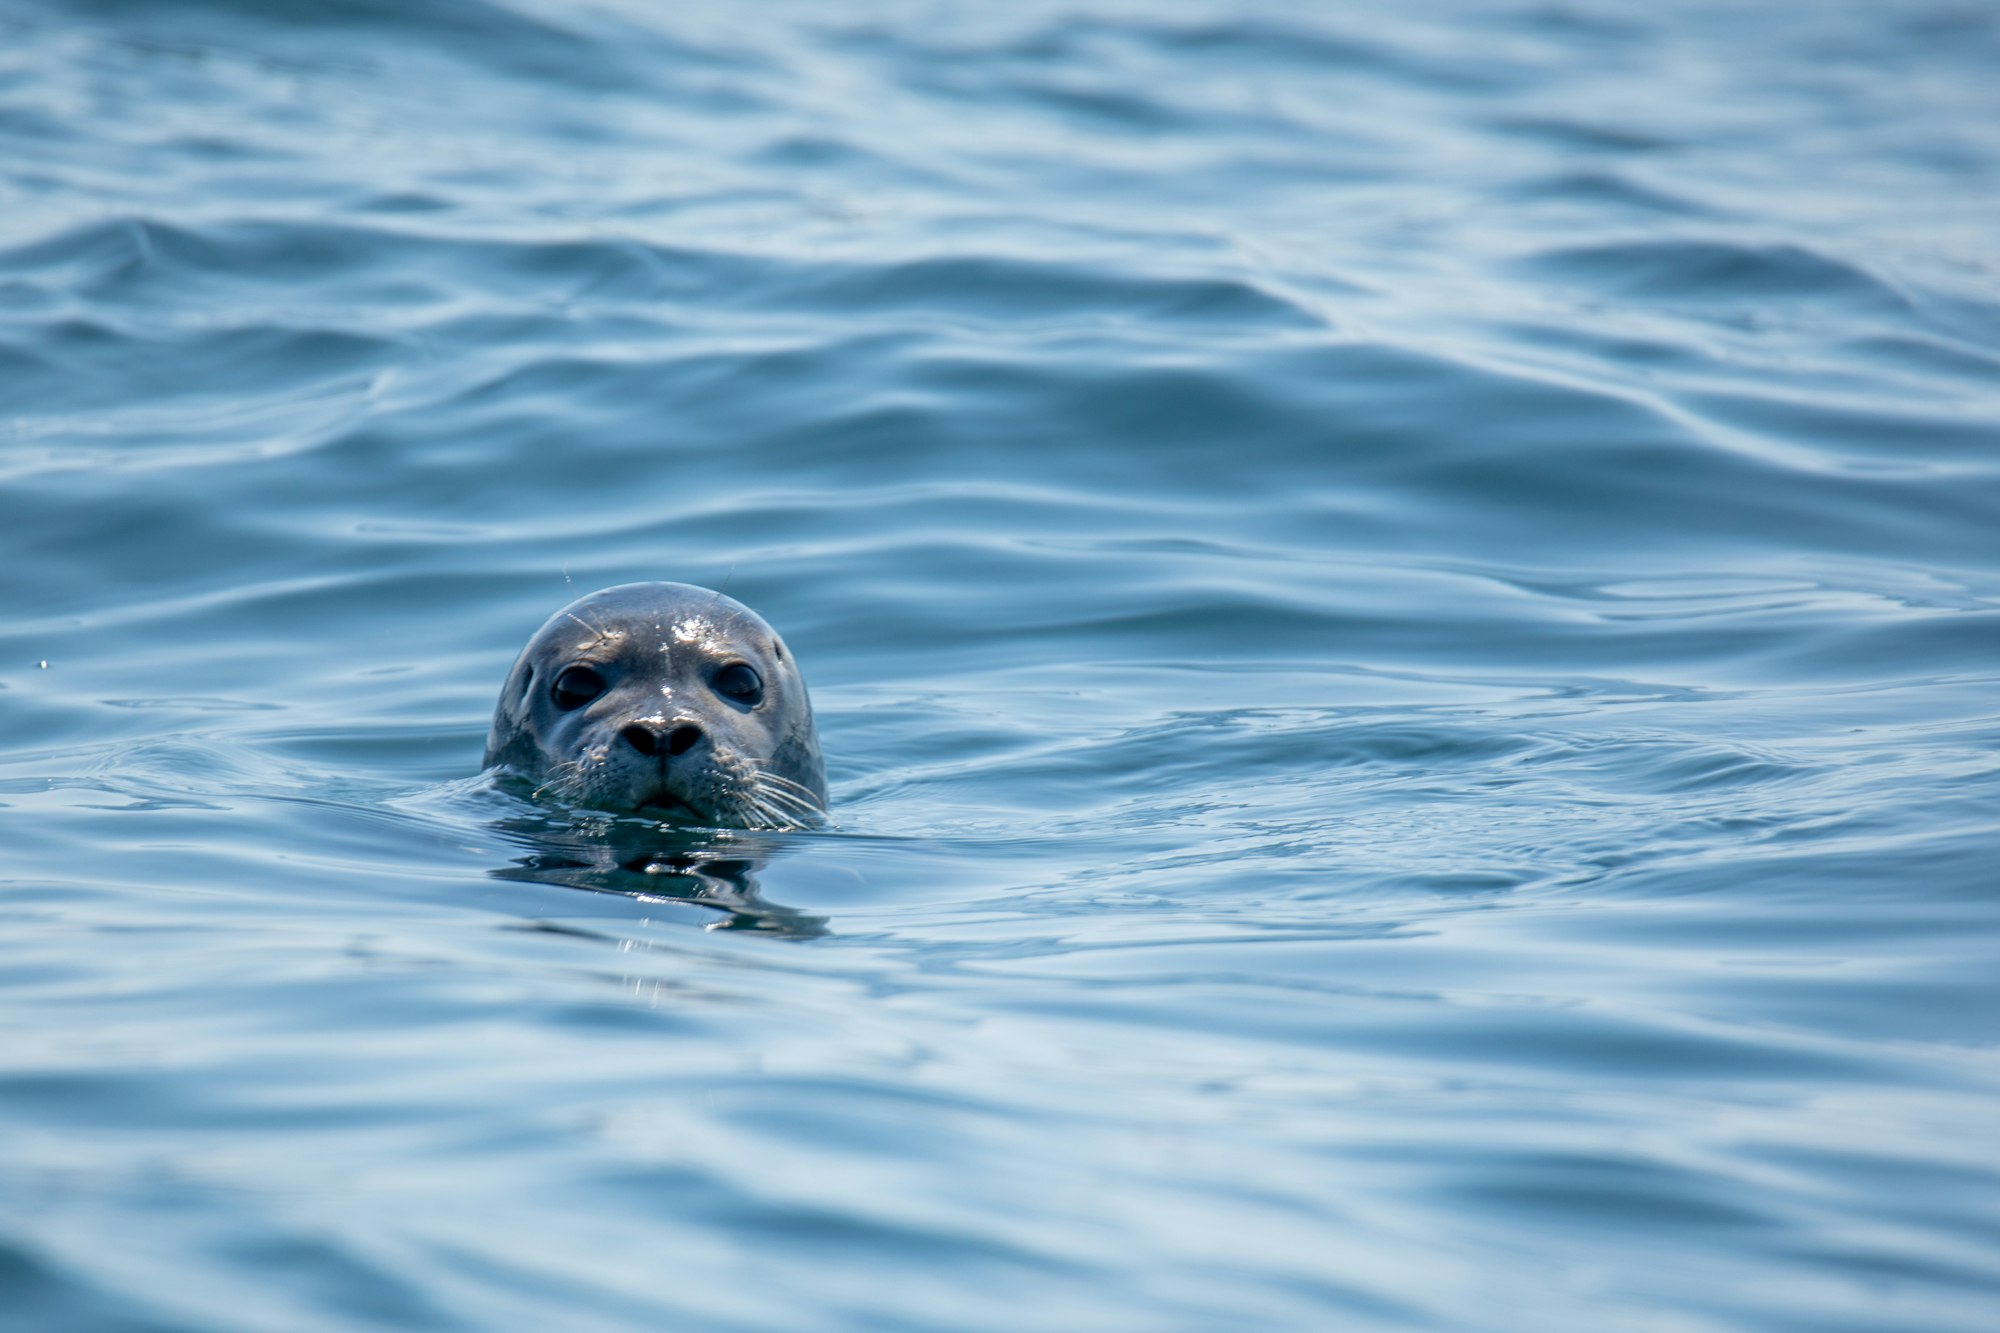 I happened across this curious harbor seal while out photographing sailboat races in Boothbay Harbor. He didn’t stick around long - seals never do…